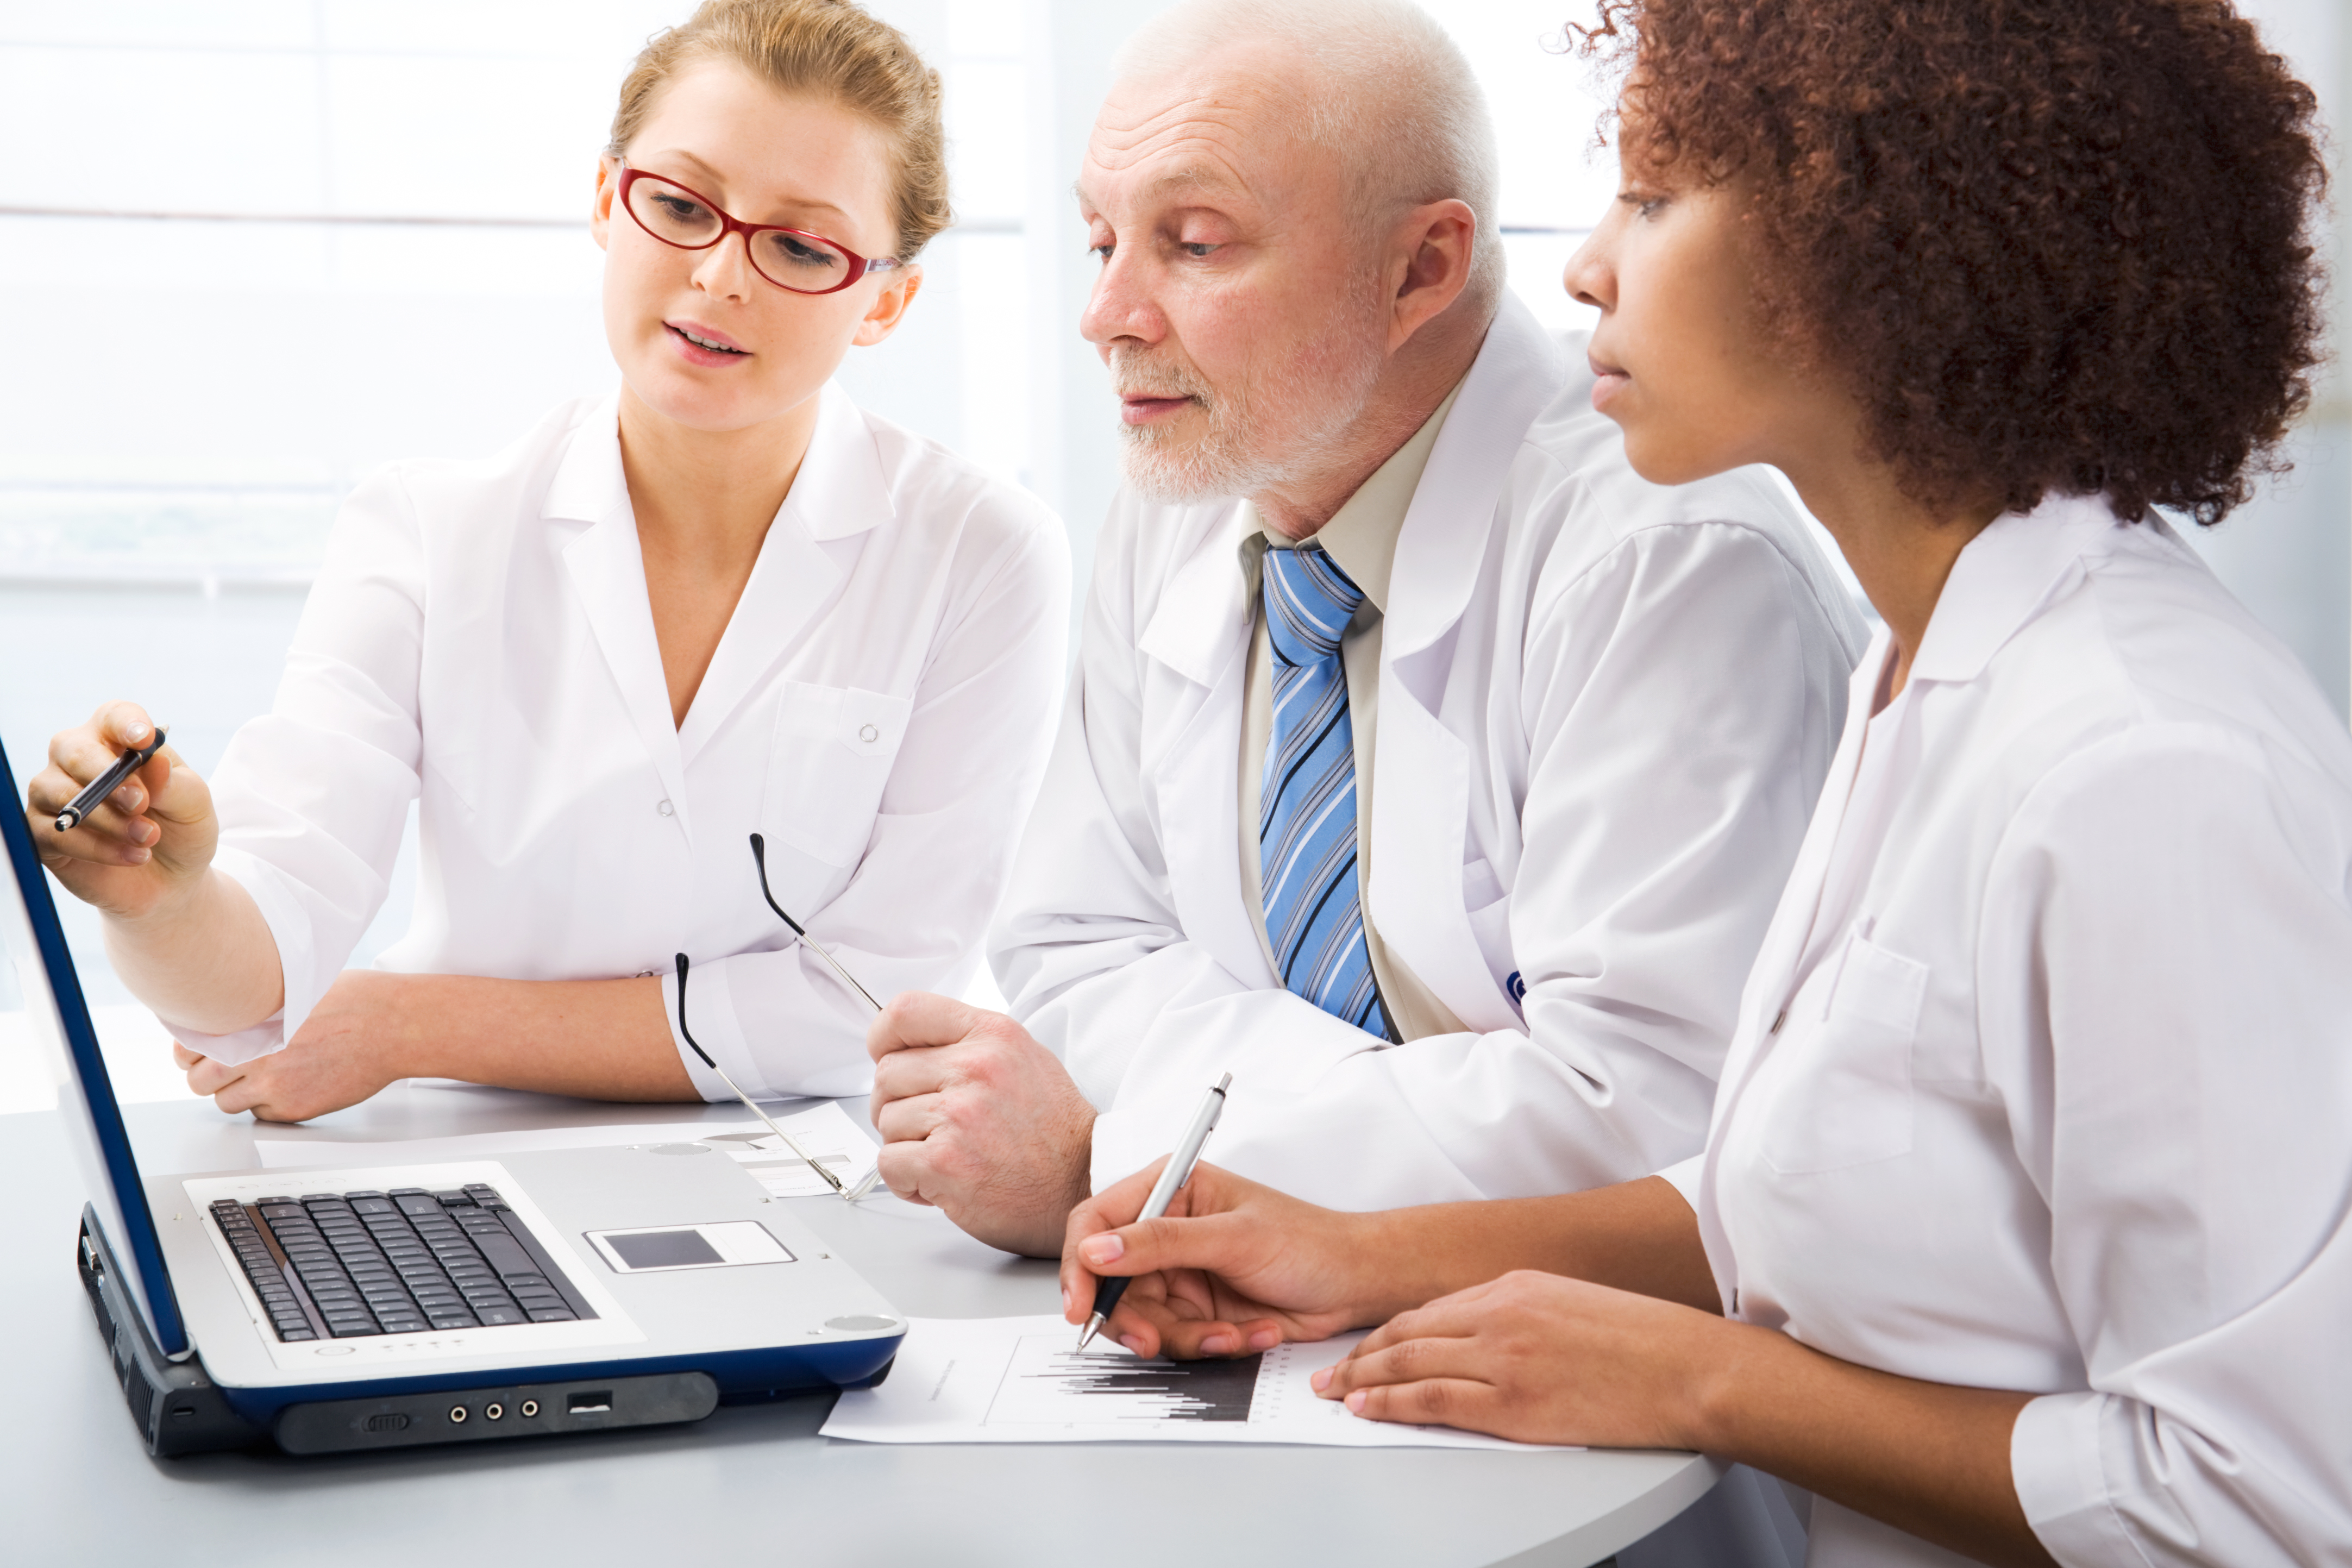 Group of doctors discuss work in an office